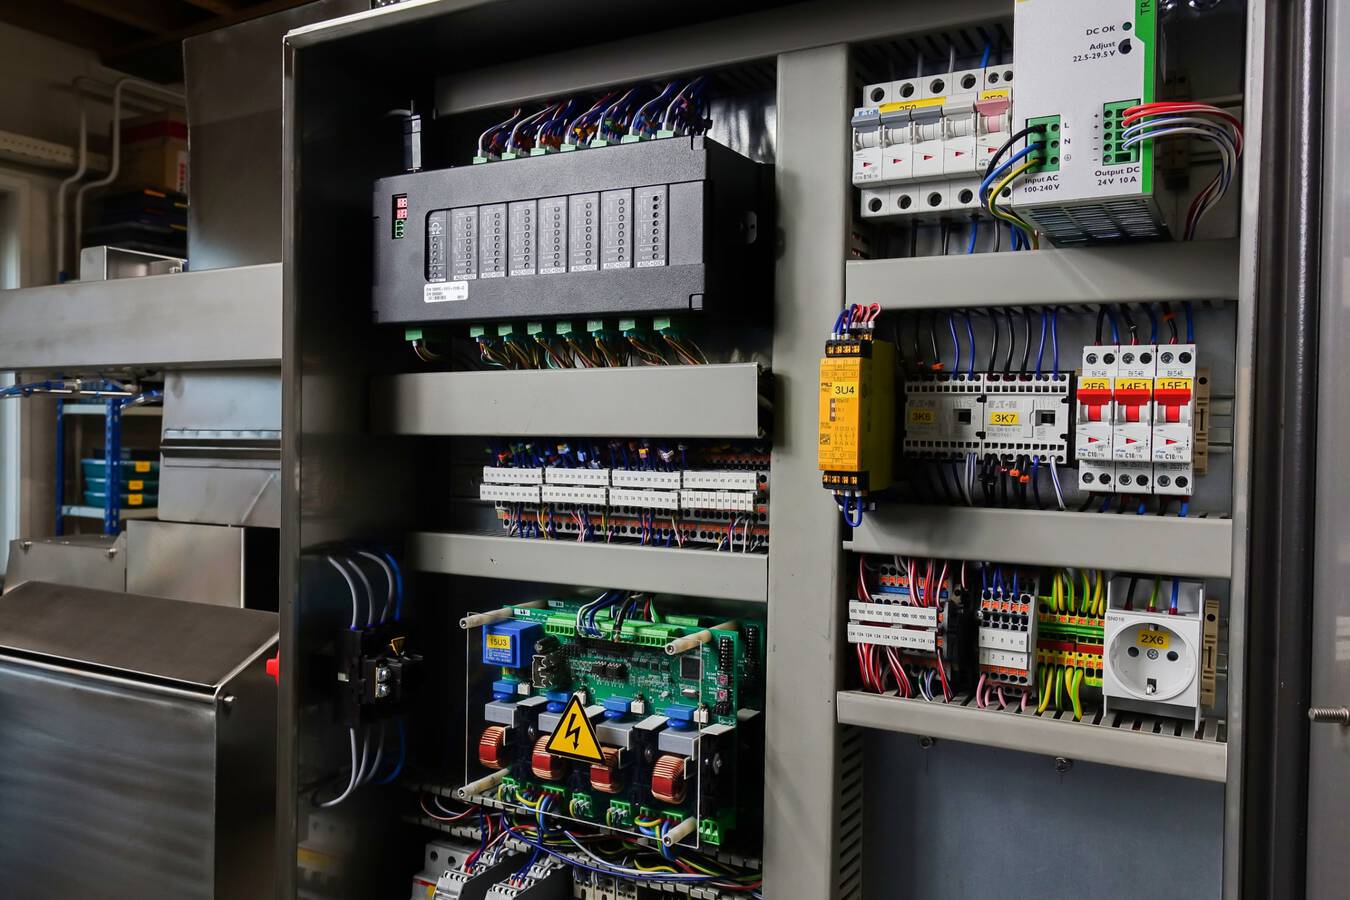 Rovema Benelux upgrades with PENKO’s Omega Leading manufacturer of packaging machines – Rovema Benelux selects PENKO’s Programmable Logic Controller (PLC) Omega to upgrade its existing system with a new multi-head and powerful control.